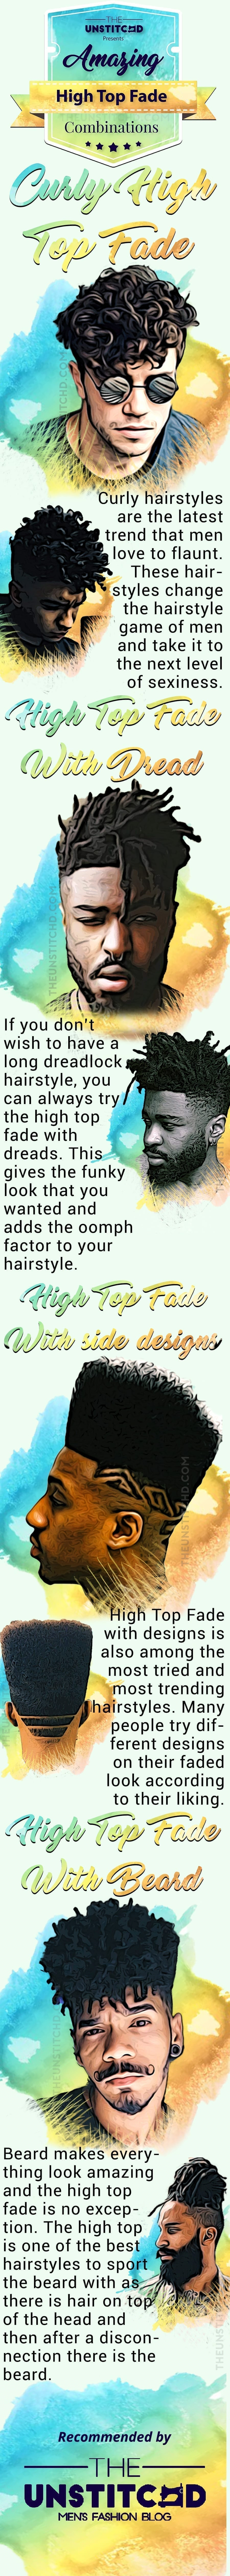 high-top-fade-hairstyle-info